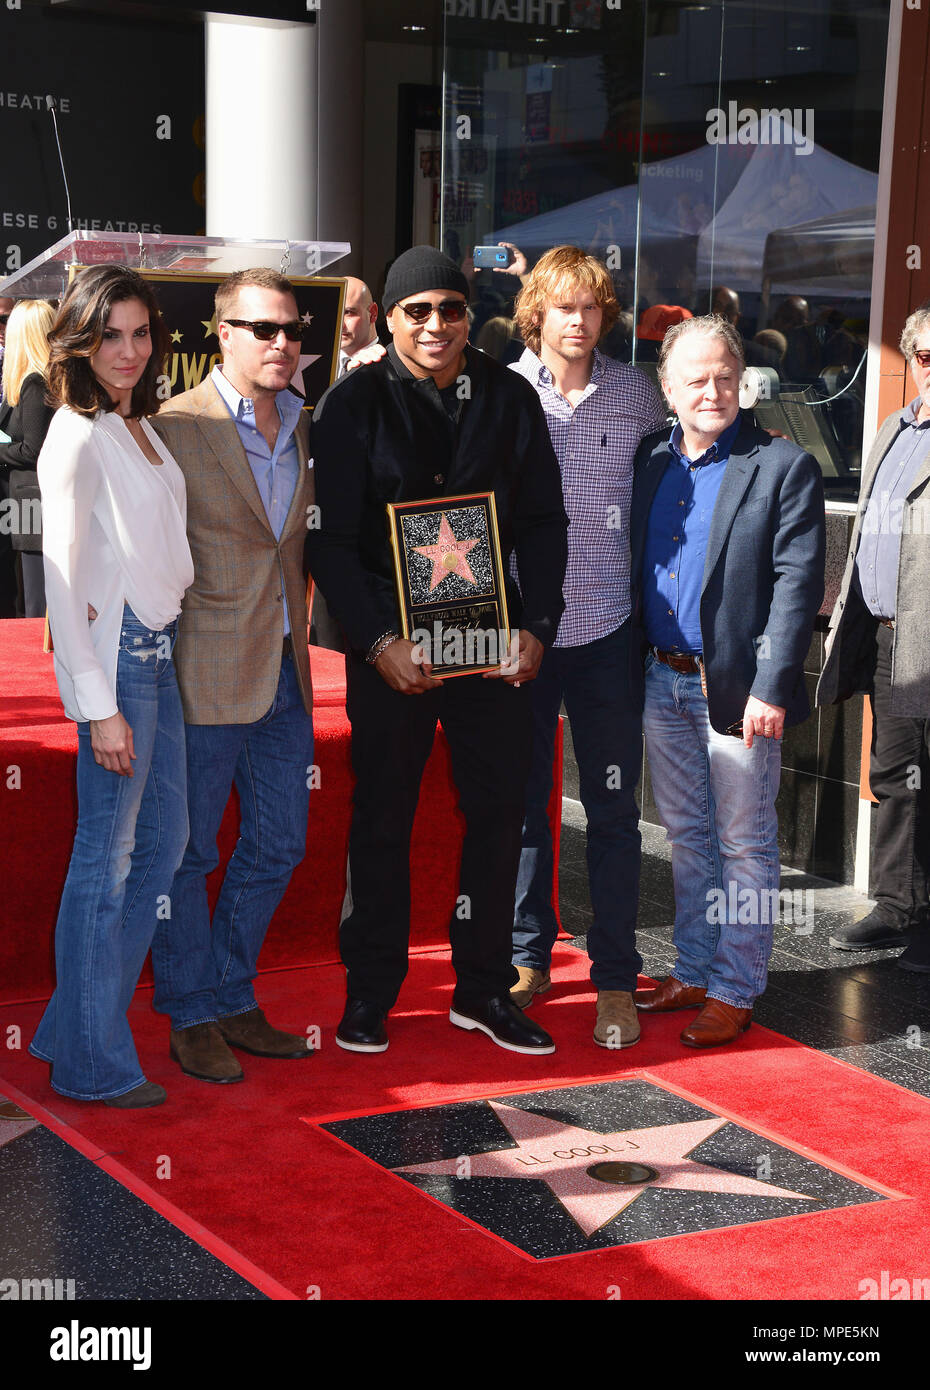 LL Cool J Star 020 cast of NCIS- Los Angeles  at LL Cool Honored with a Star on the Hollywood Walk Of fame in Los Angeles. January 21, 2016.LL Cool J Star 020 cast of NCIS- Los Angeles   Event in Hollywood Life - California, Red Carpet Event, USA, Film Industry, Celebrities, Photography, Bestof, Arts Culture and Entertainment, Topix Celebrities fashion, Best of, Hollywood Life, Event in Hollywood Life - California, Red Carpet and backstage, movie celebrities, TV celebrities, Music celebrities, Arts Culture and Entertainment, vertical, one person, Photography,    inquiry tsuni@Gamma-USA.com , C Stock Photo